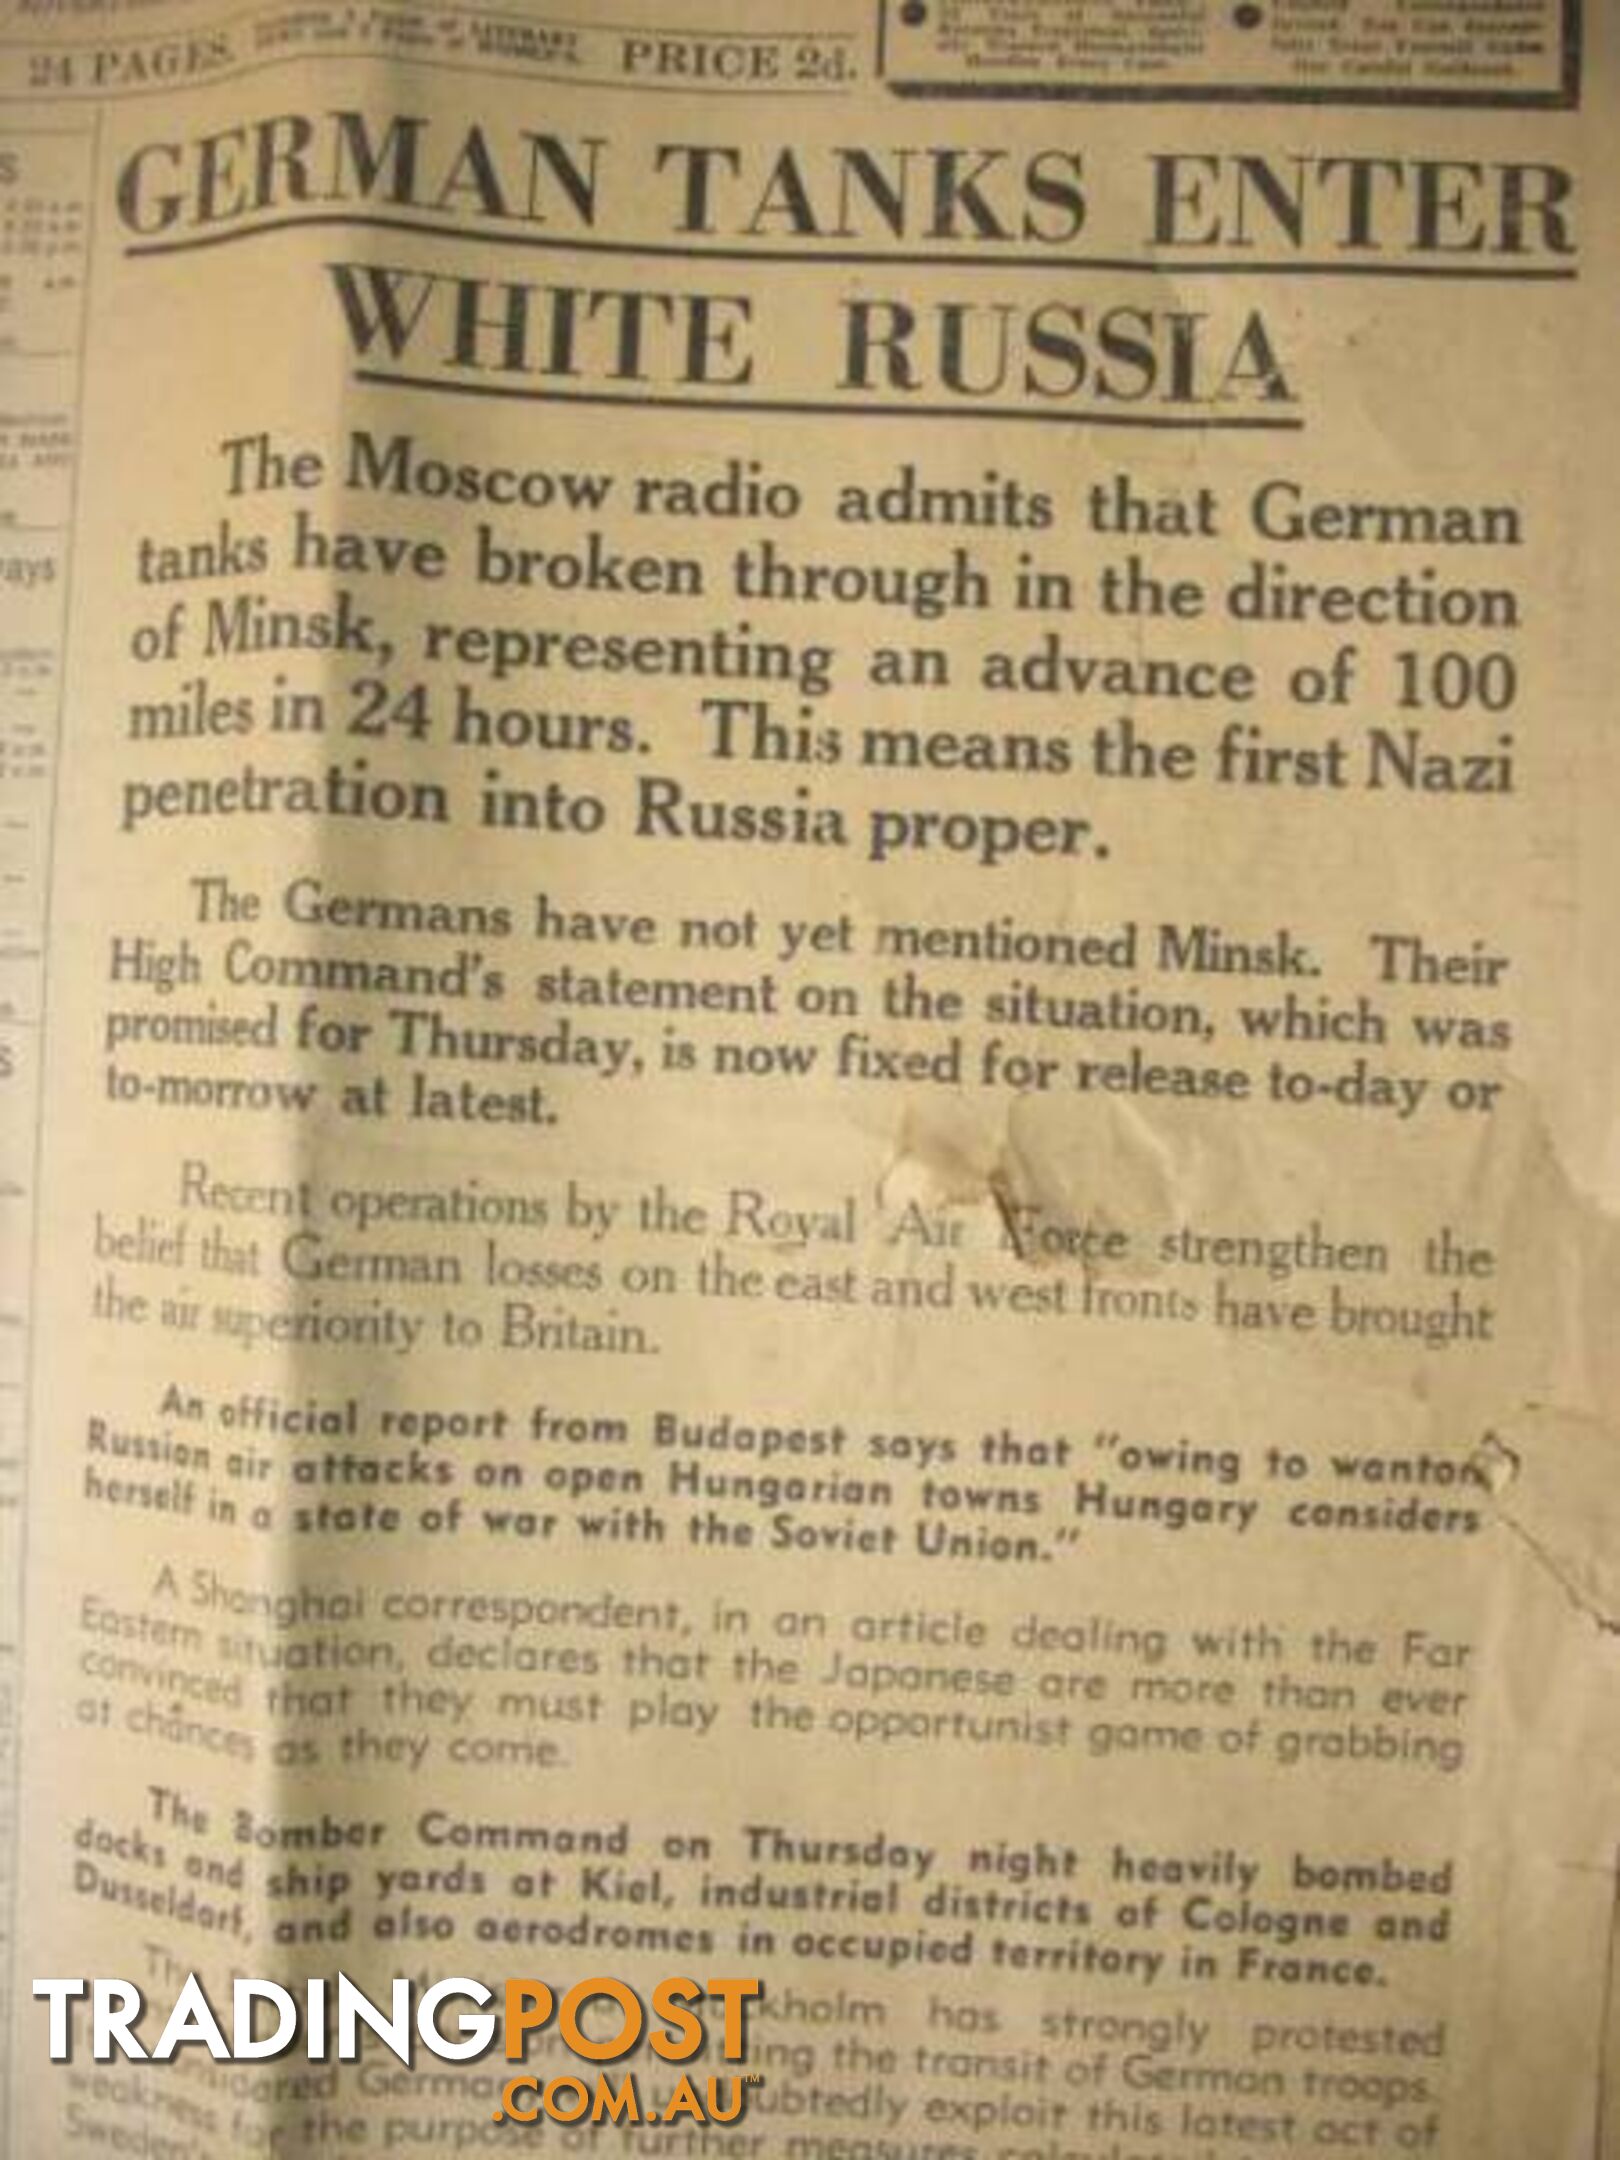 THE AGE 29TH JUNE 1941 GERMAN TANKS ENTER WHITE RUSSIA FRONT PAGE